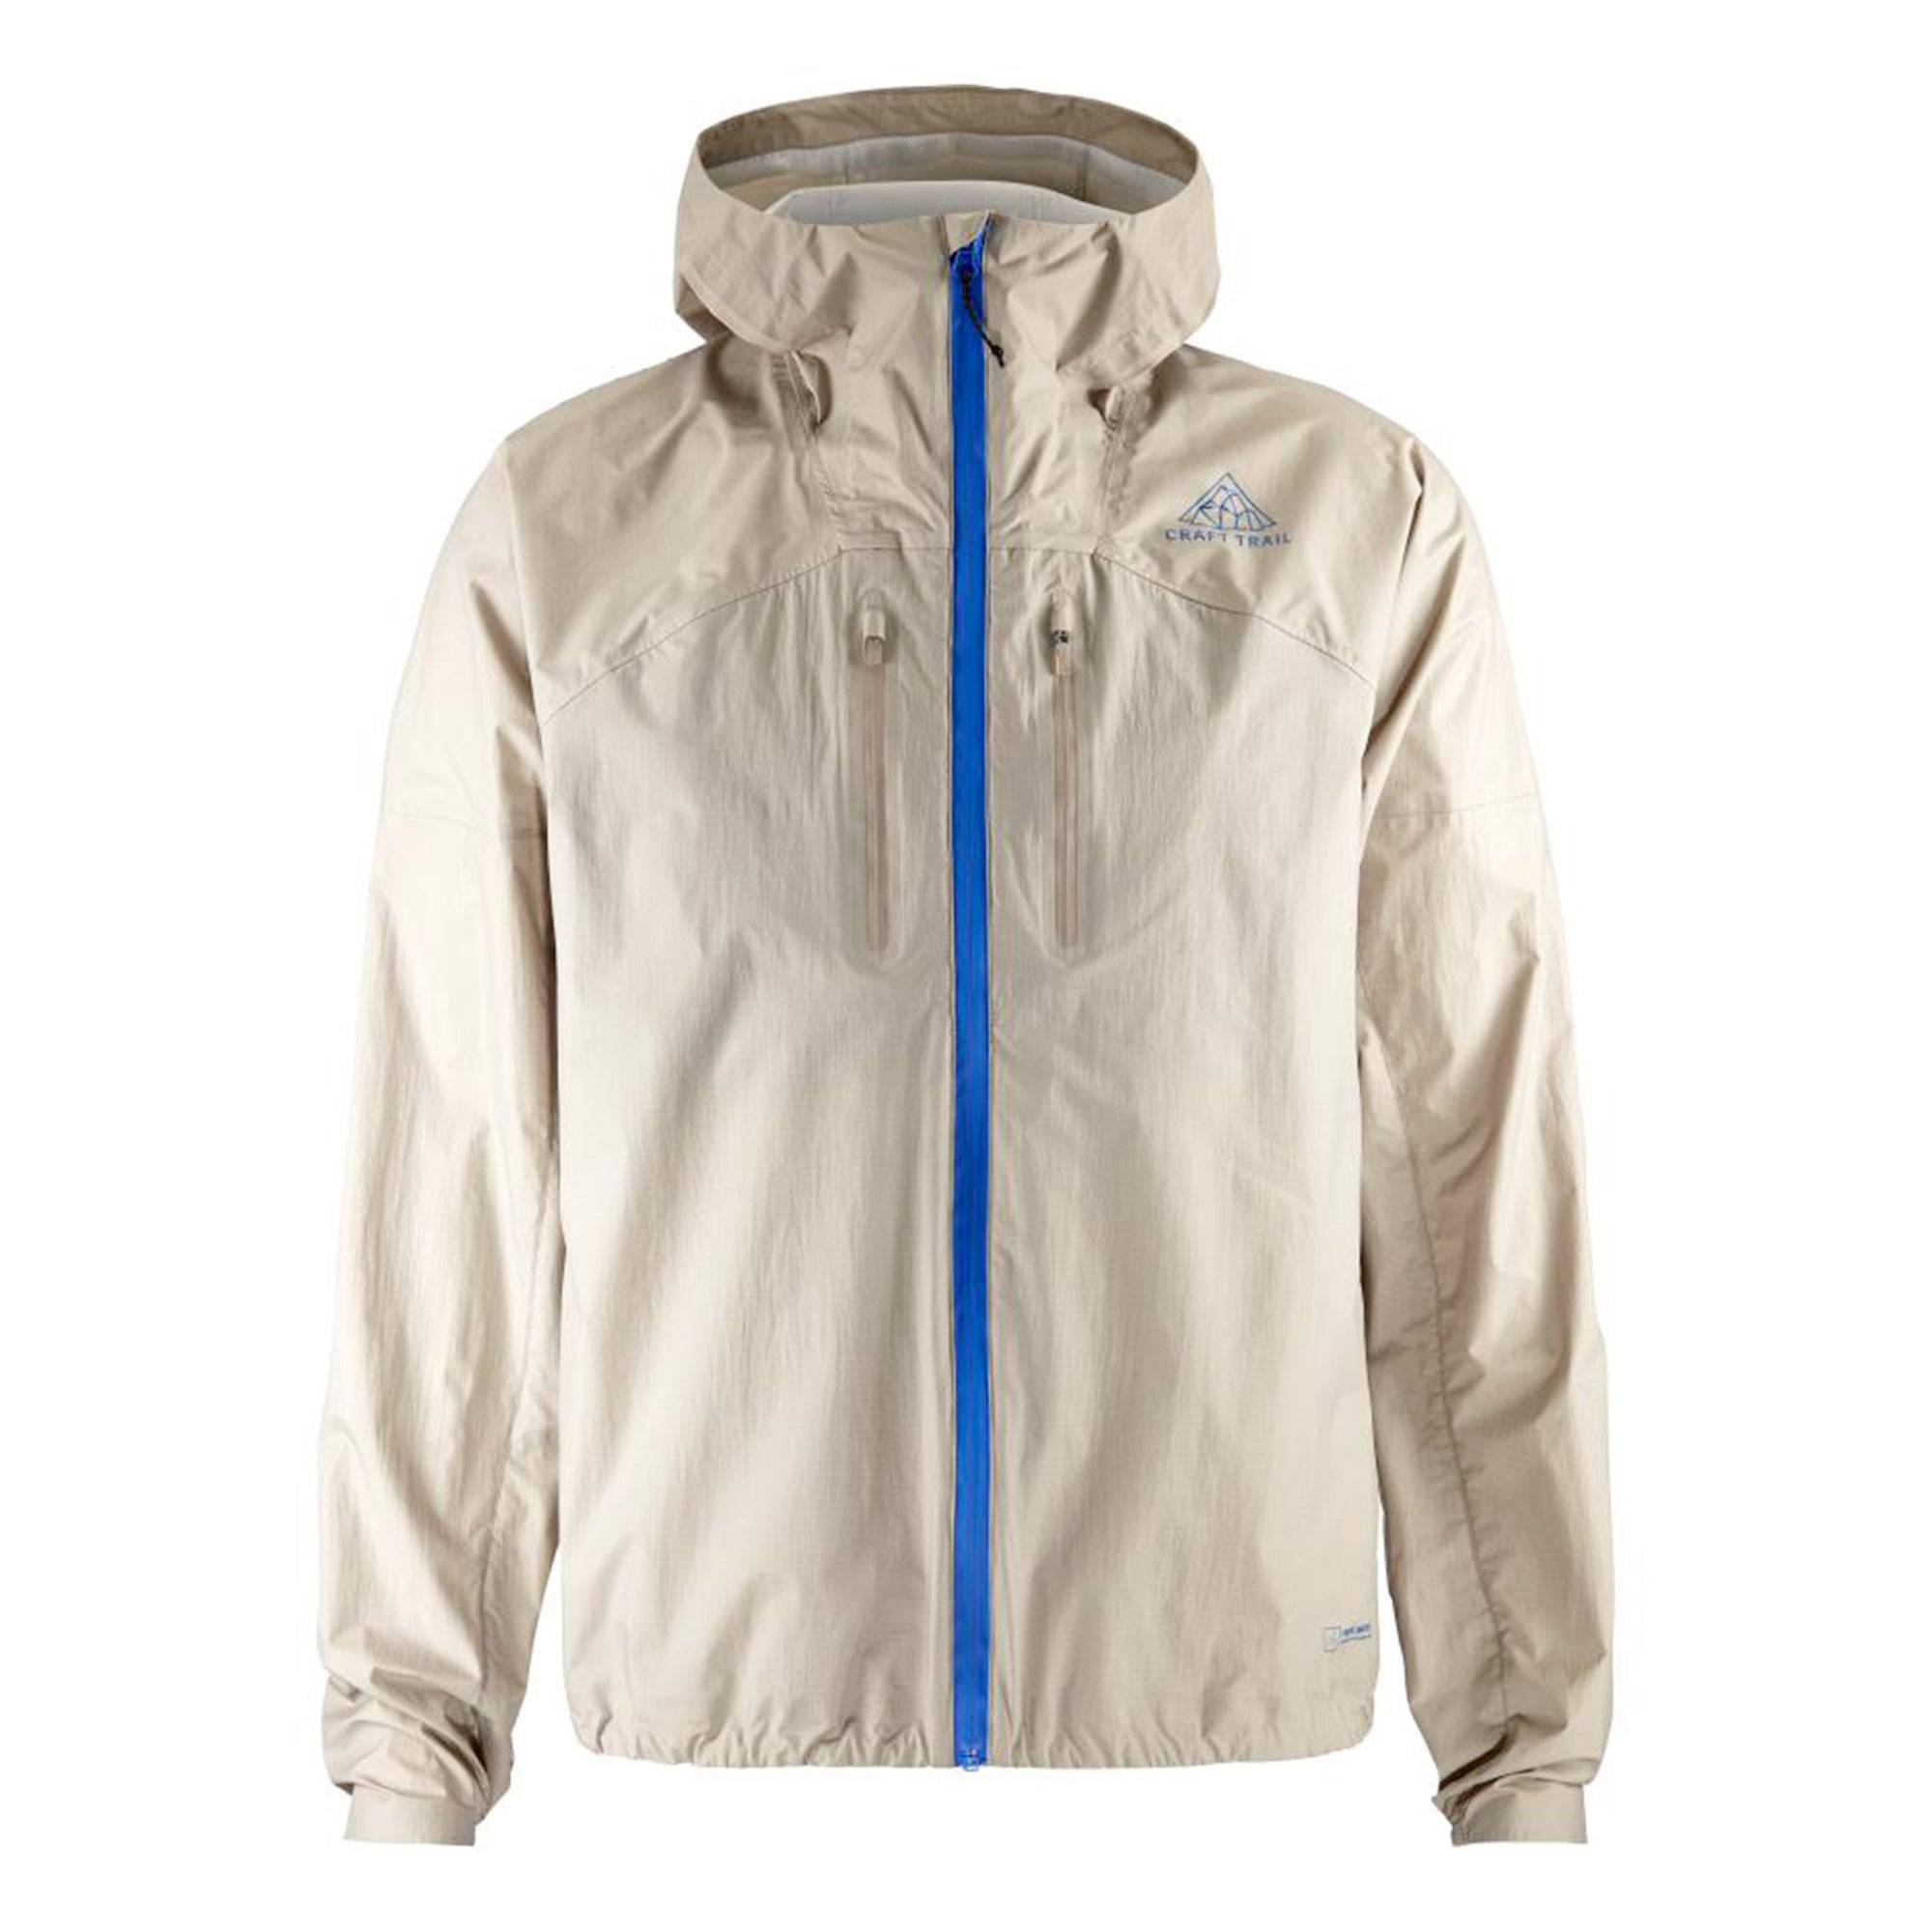 CRAFT PRO TRAIL 2L LIGHT WEIGHT JACKET - HOMME